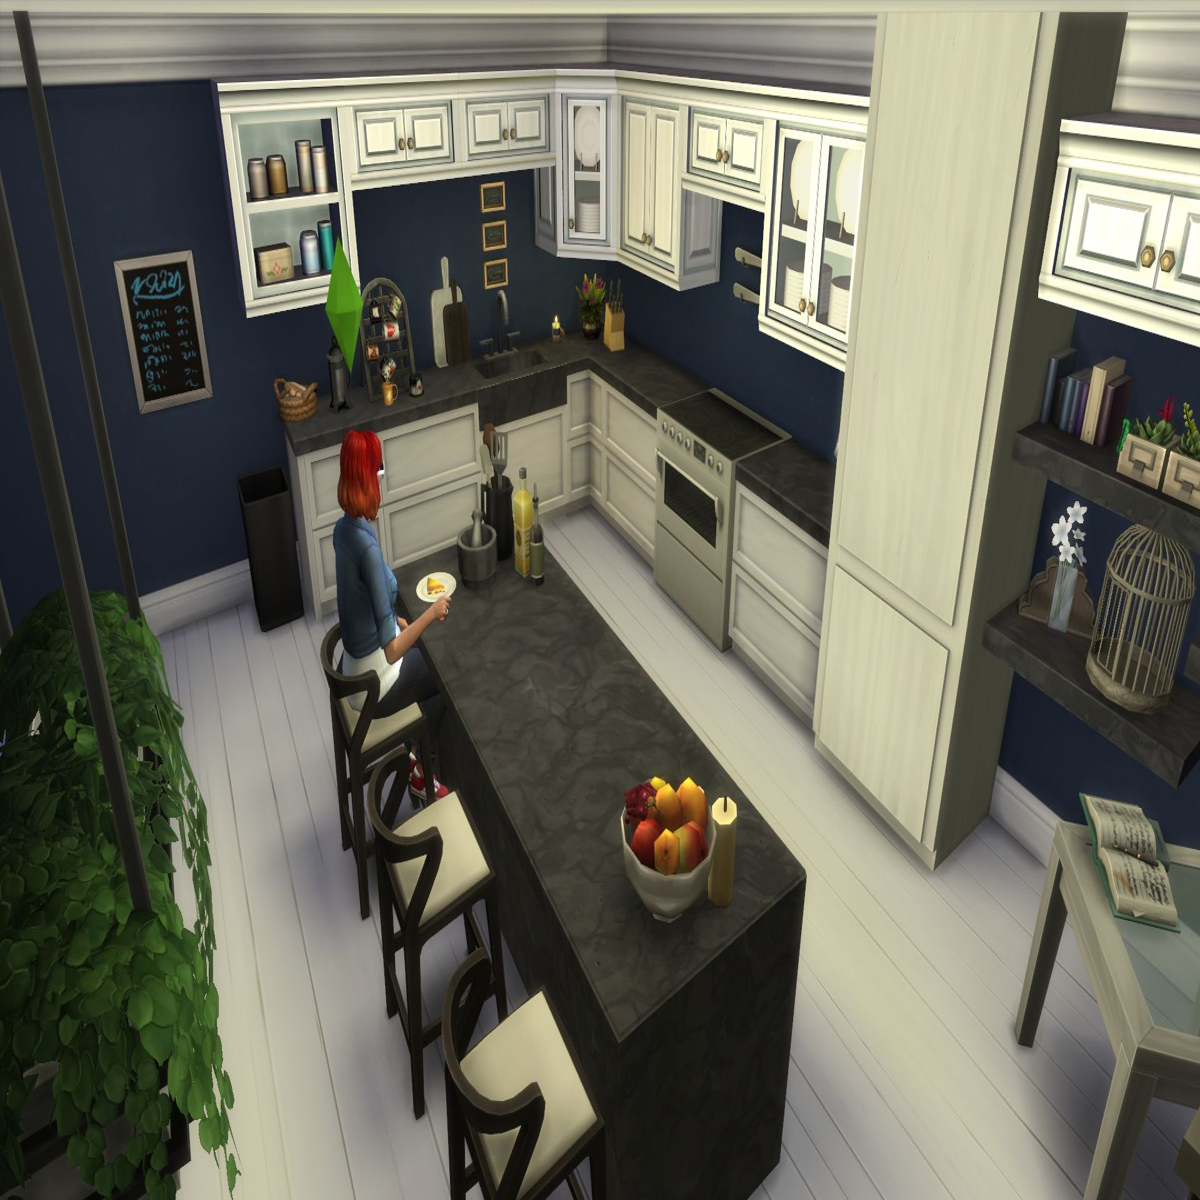 https://assetsio.reedpopcdn.com/the-sims-4-bougie-kitchen-build-1.jpg?width=1200&height=1200&fit=crop&quality=100&format=png&enable=upscale&auto=webp